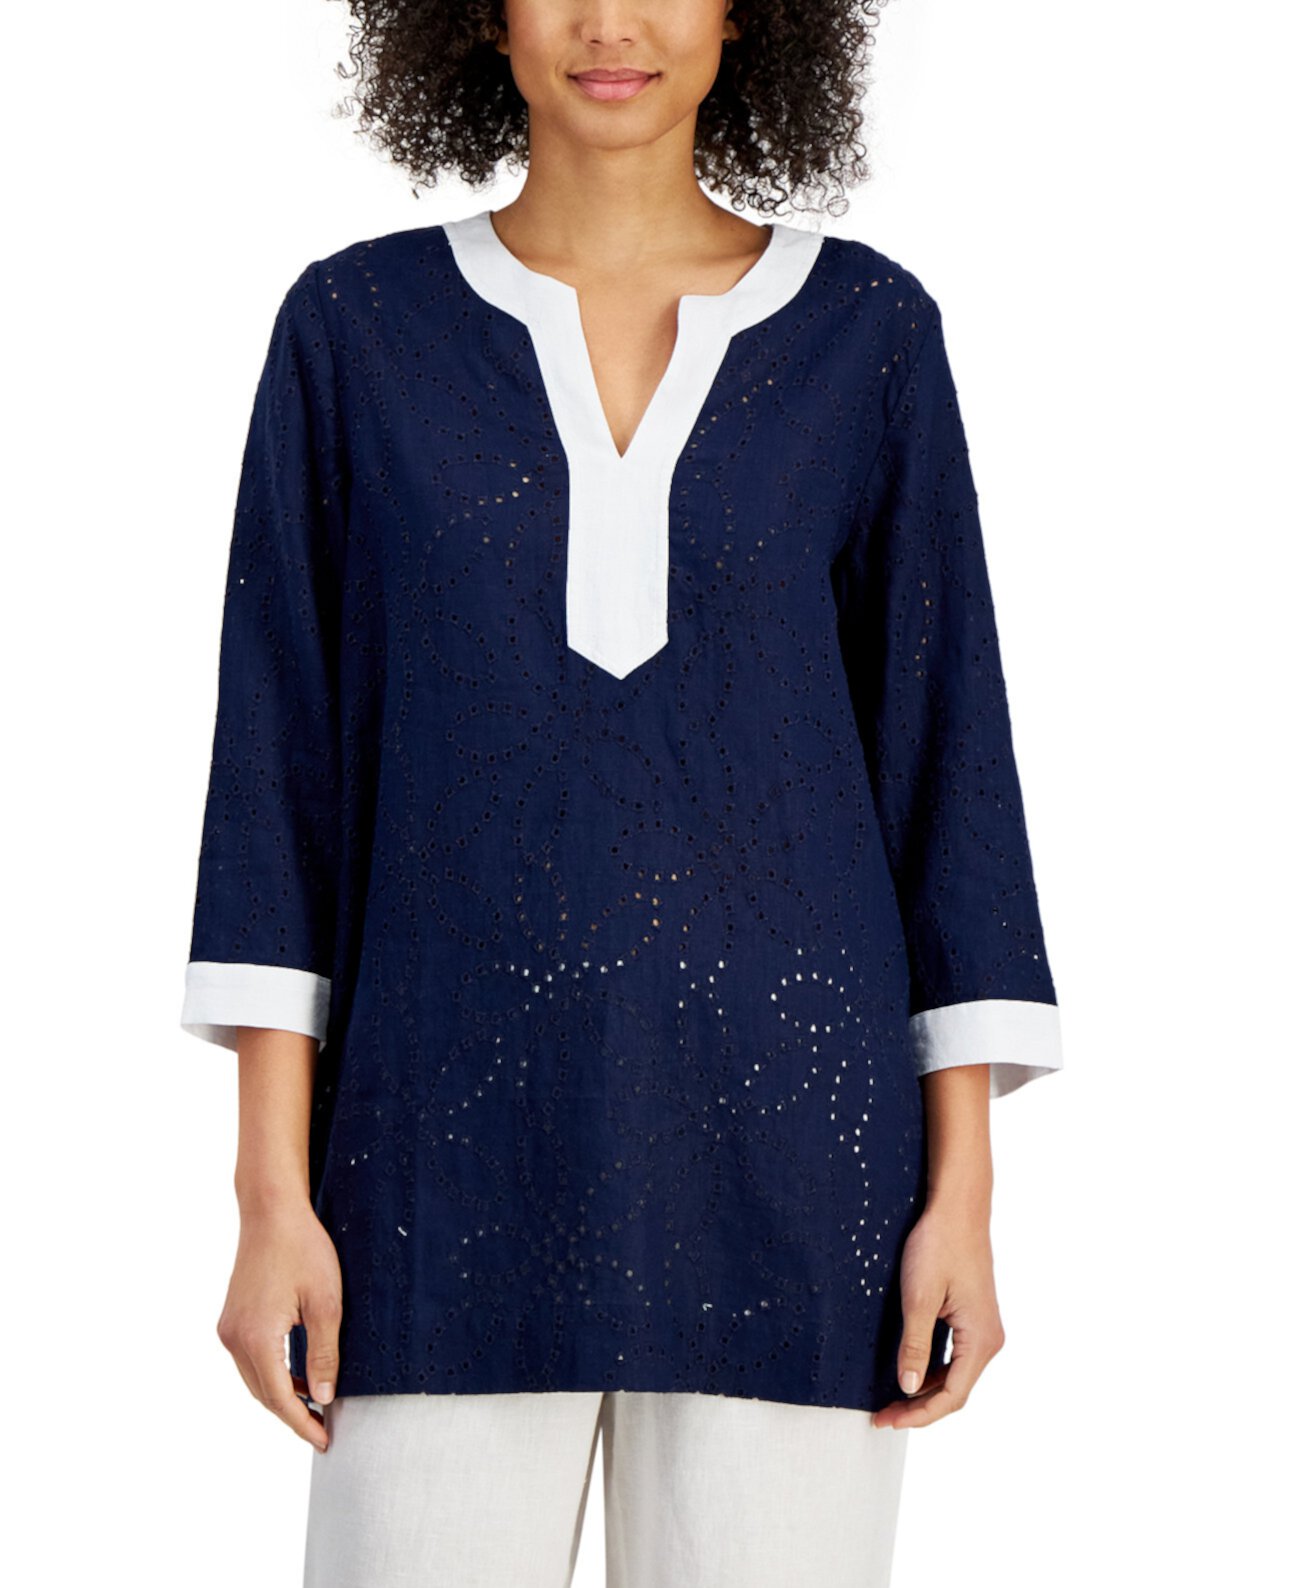 100% Linen Petite Colorblocked Eyelet 3/4 Sleeve Tunic Top, Created for Macy's Charter Club